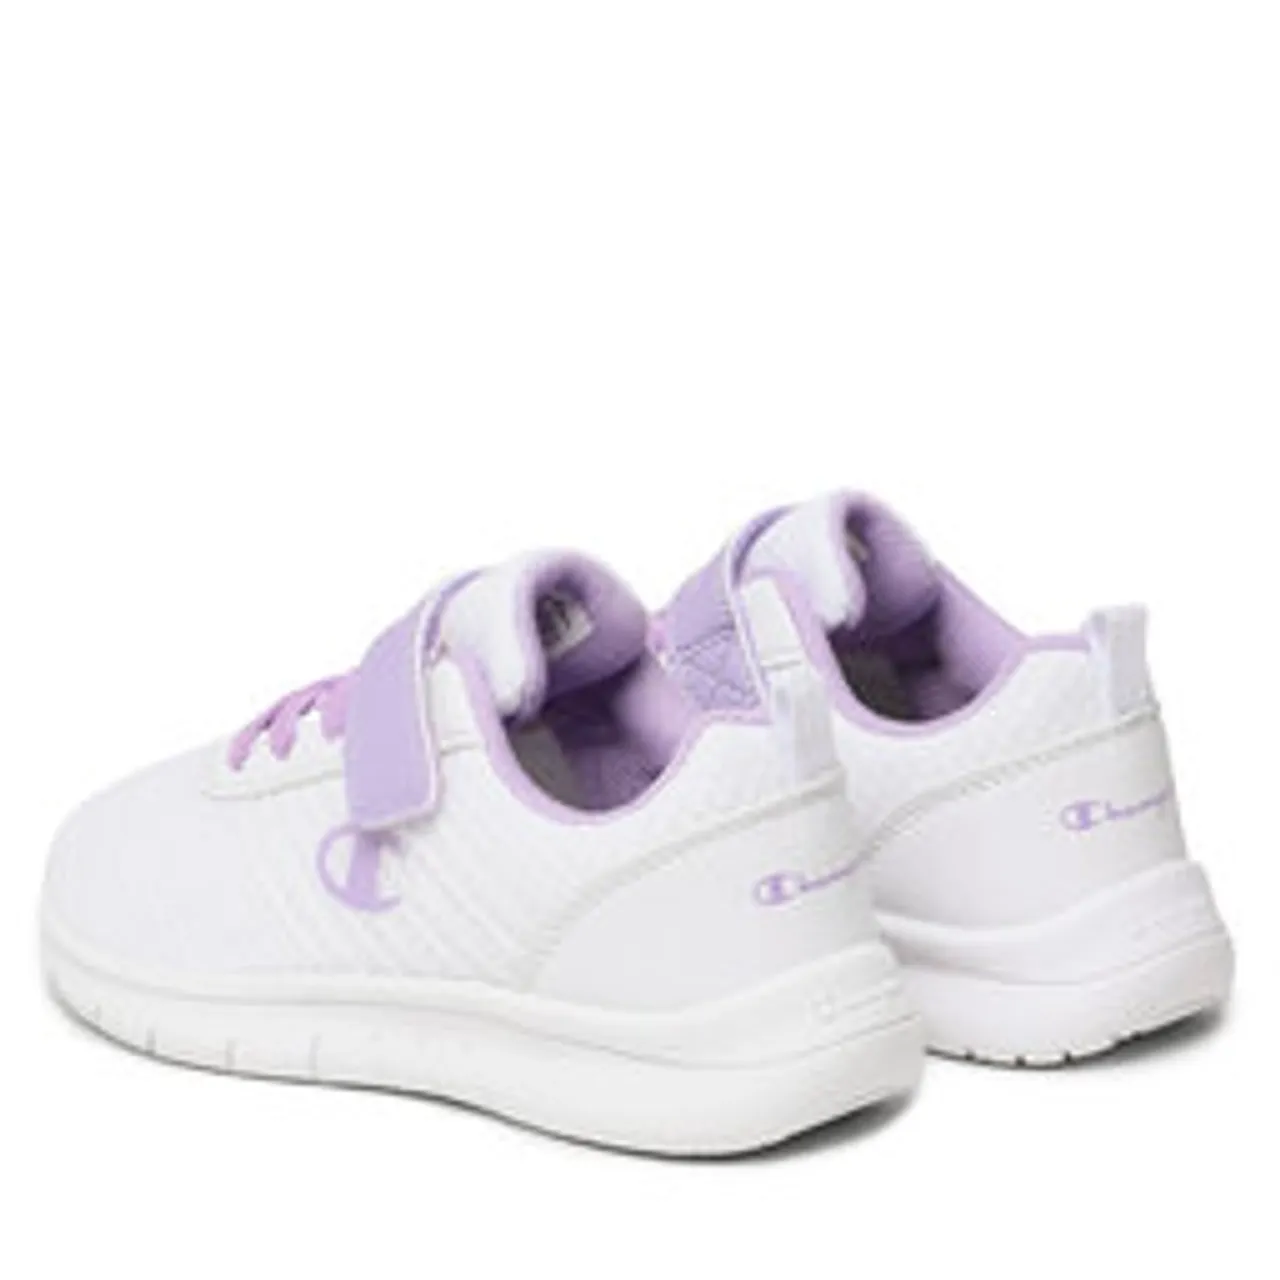 Sneakers Champion Cloud Adv G Ps S32559-WW006 Wht/Lilac